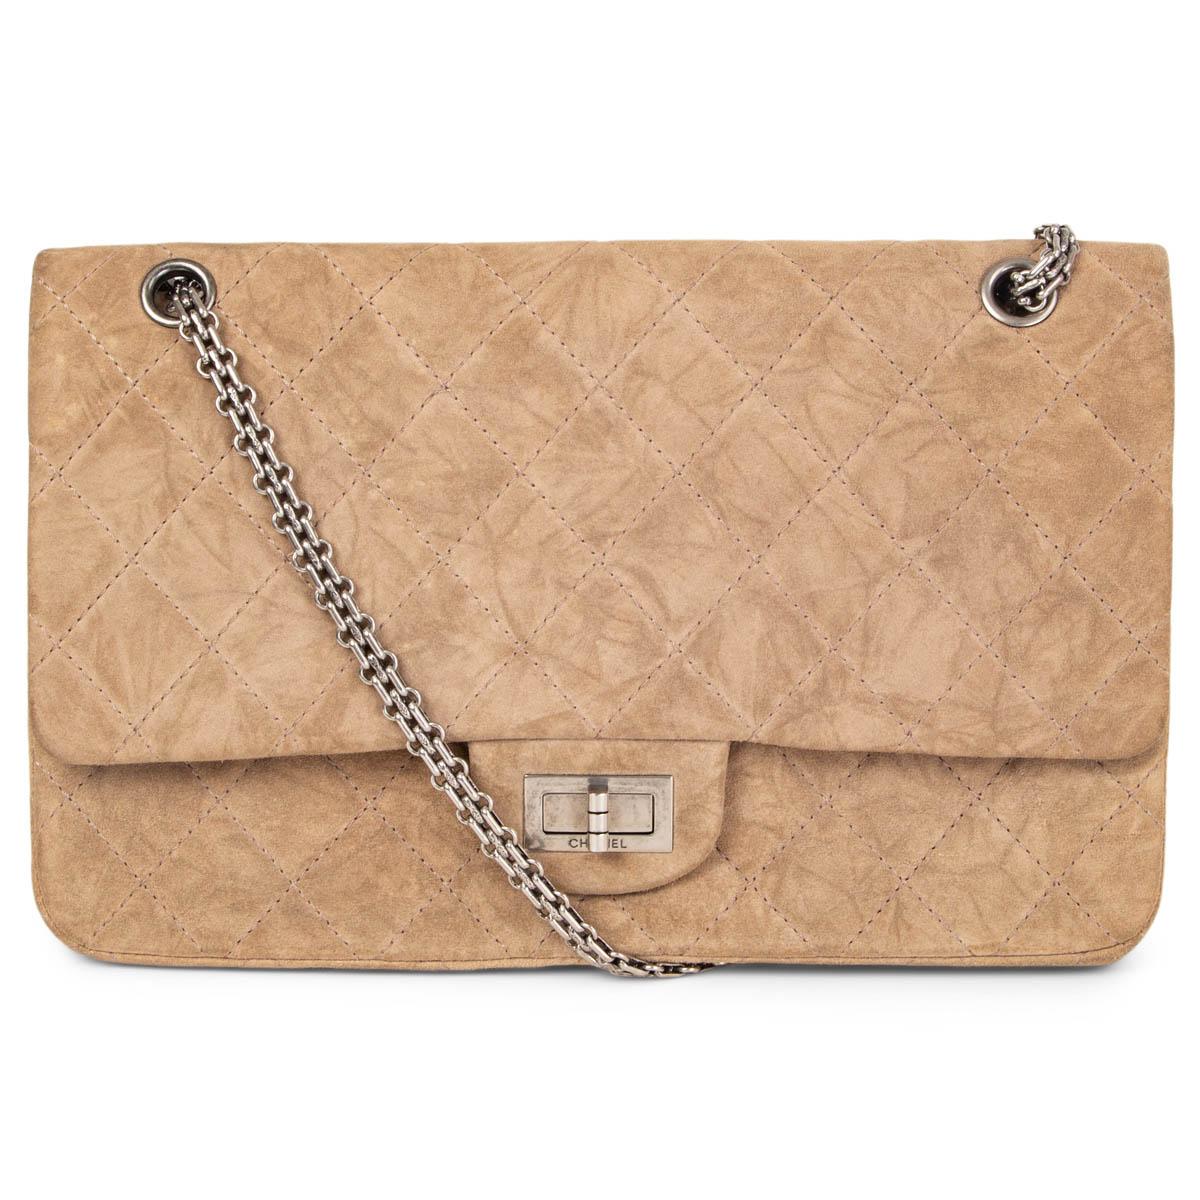 100% authentic Chanel 2.55 Reissue 227 Maxi  Double Flap Bag in distressd sand suese featuring antique silver-tone metal chain link shoulder-strap and turn-lock. Opens to a beige lined calfskin interior with one open pocket under the flap and one to